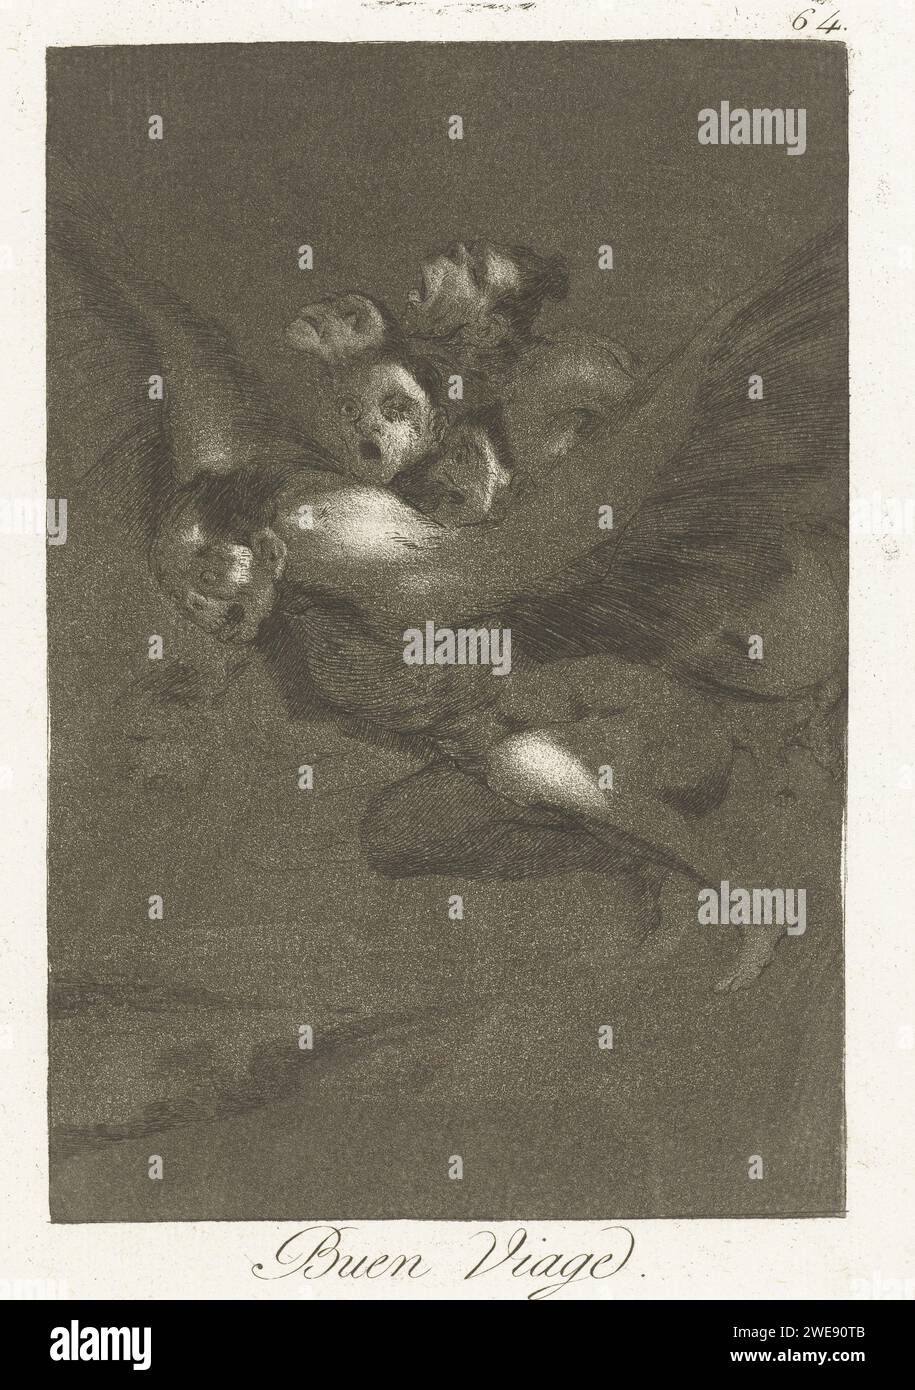 Good trip, Francisco de Goya, 1797 - 1799 print A devil with several devils on his back flies through the night. Sixty -four print from the Los Caprichos series. Spain paper etching devil(s) and demons Stock Photo